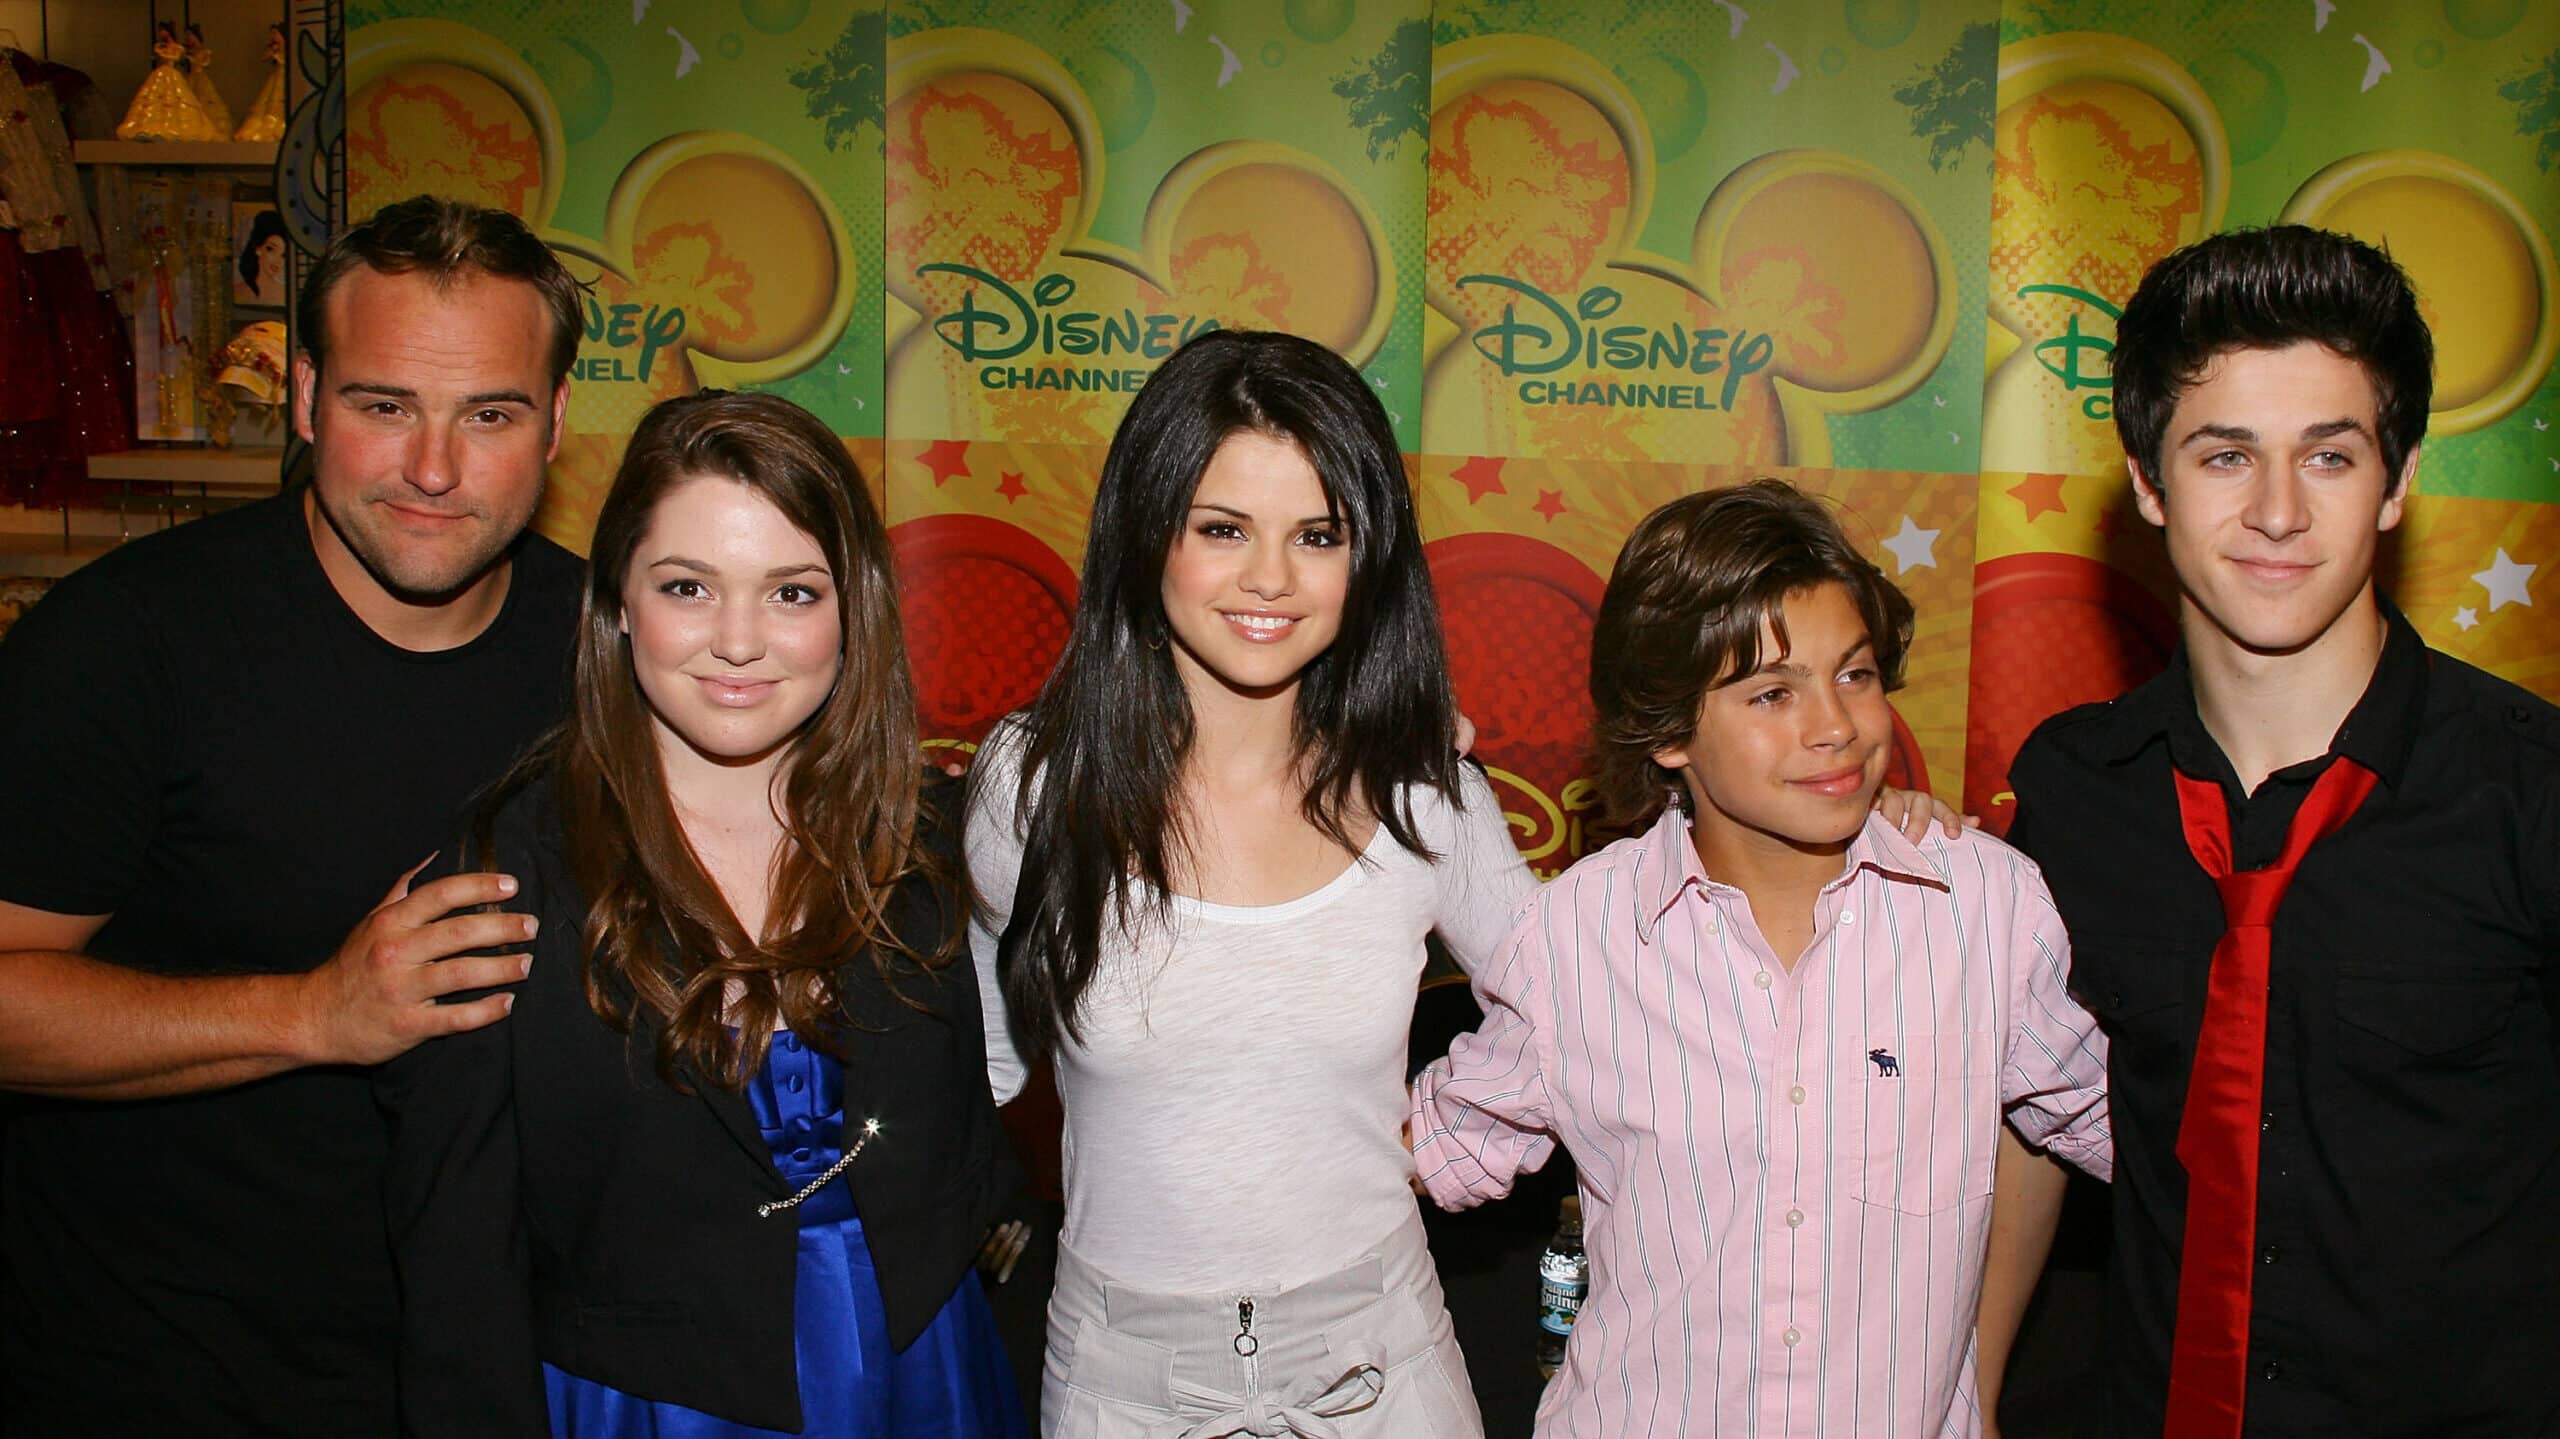 Actors David DeLuise, Jennifer Stone, Selena Gomez, Jake T. Austin and David Henrie cast of "Wizards of Waverly Place" visits the World of Disney on September 6, 2008 in New York City.